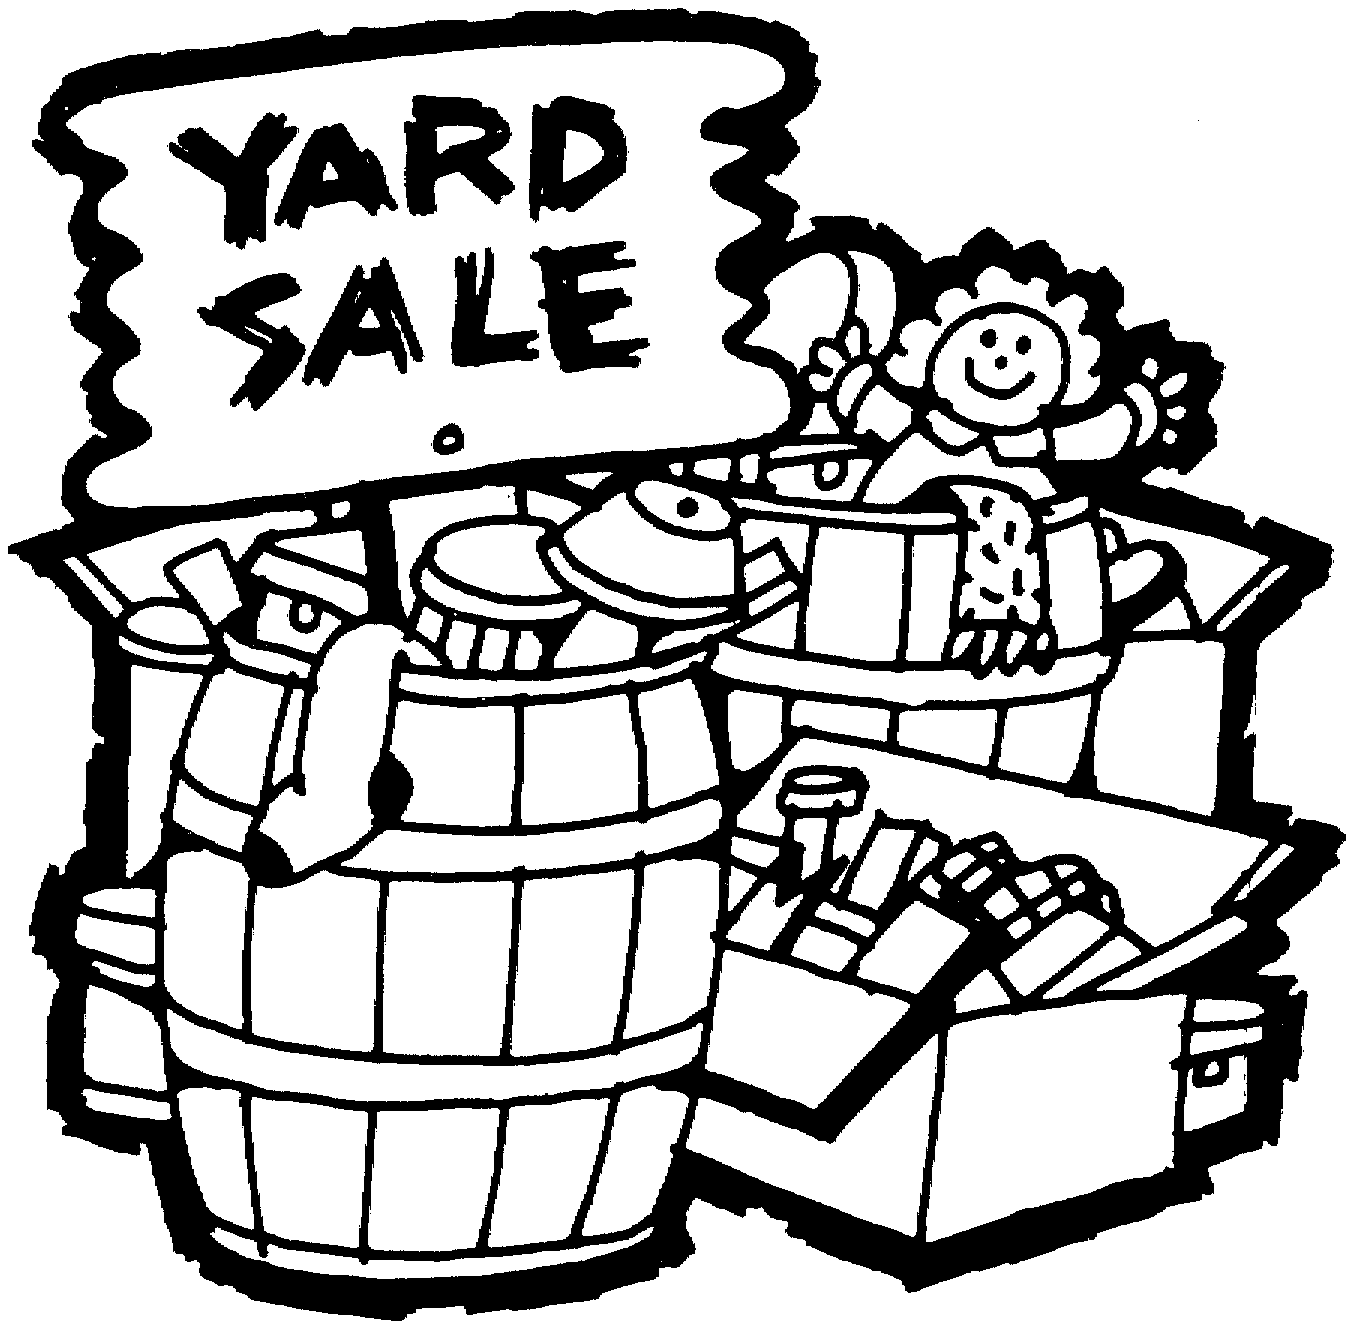 Free Yard Sale Clip Art Pictures